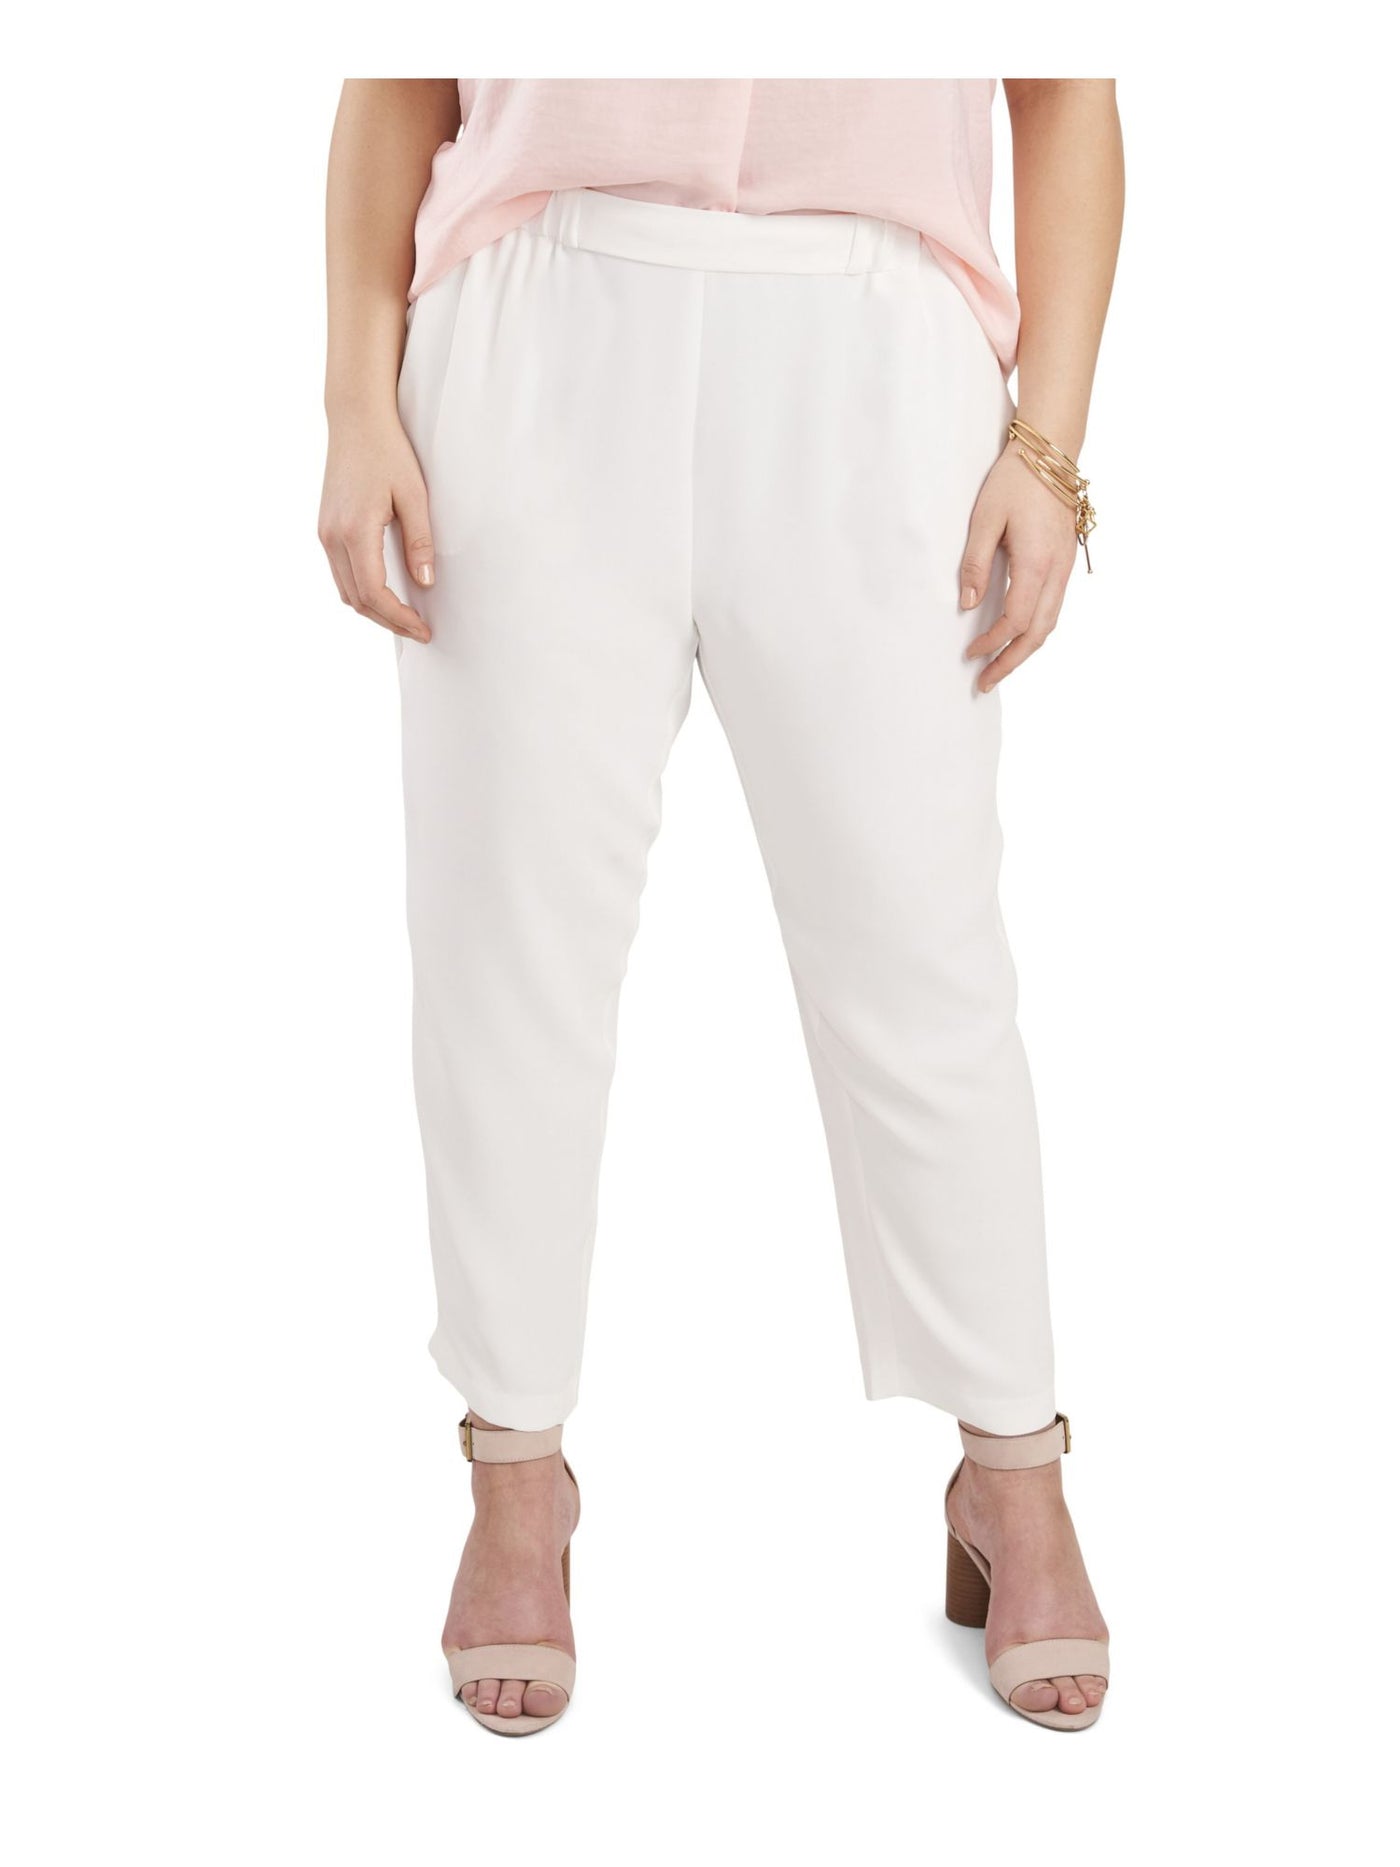 VINCE CAMUTO Womens White Stretch Pocketed Pull On Wear To Work Straight leg Pants Plus 3X